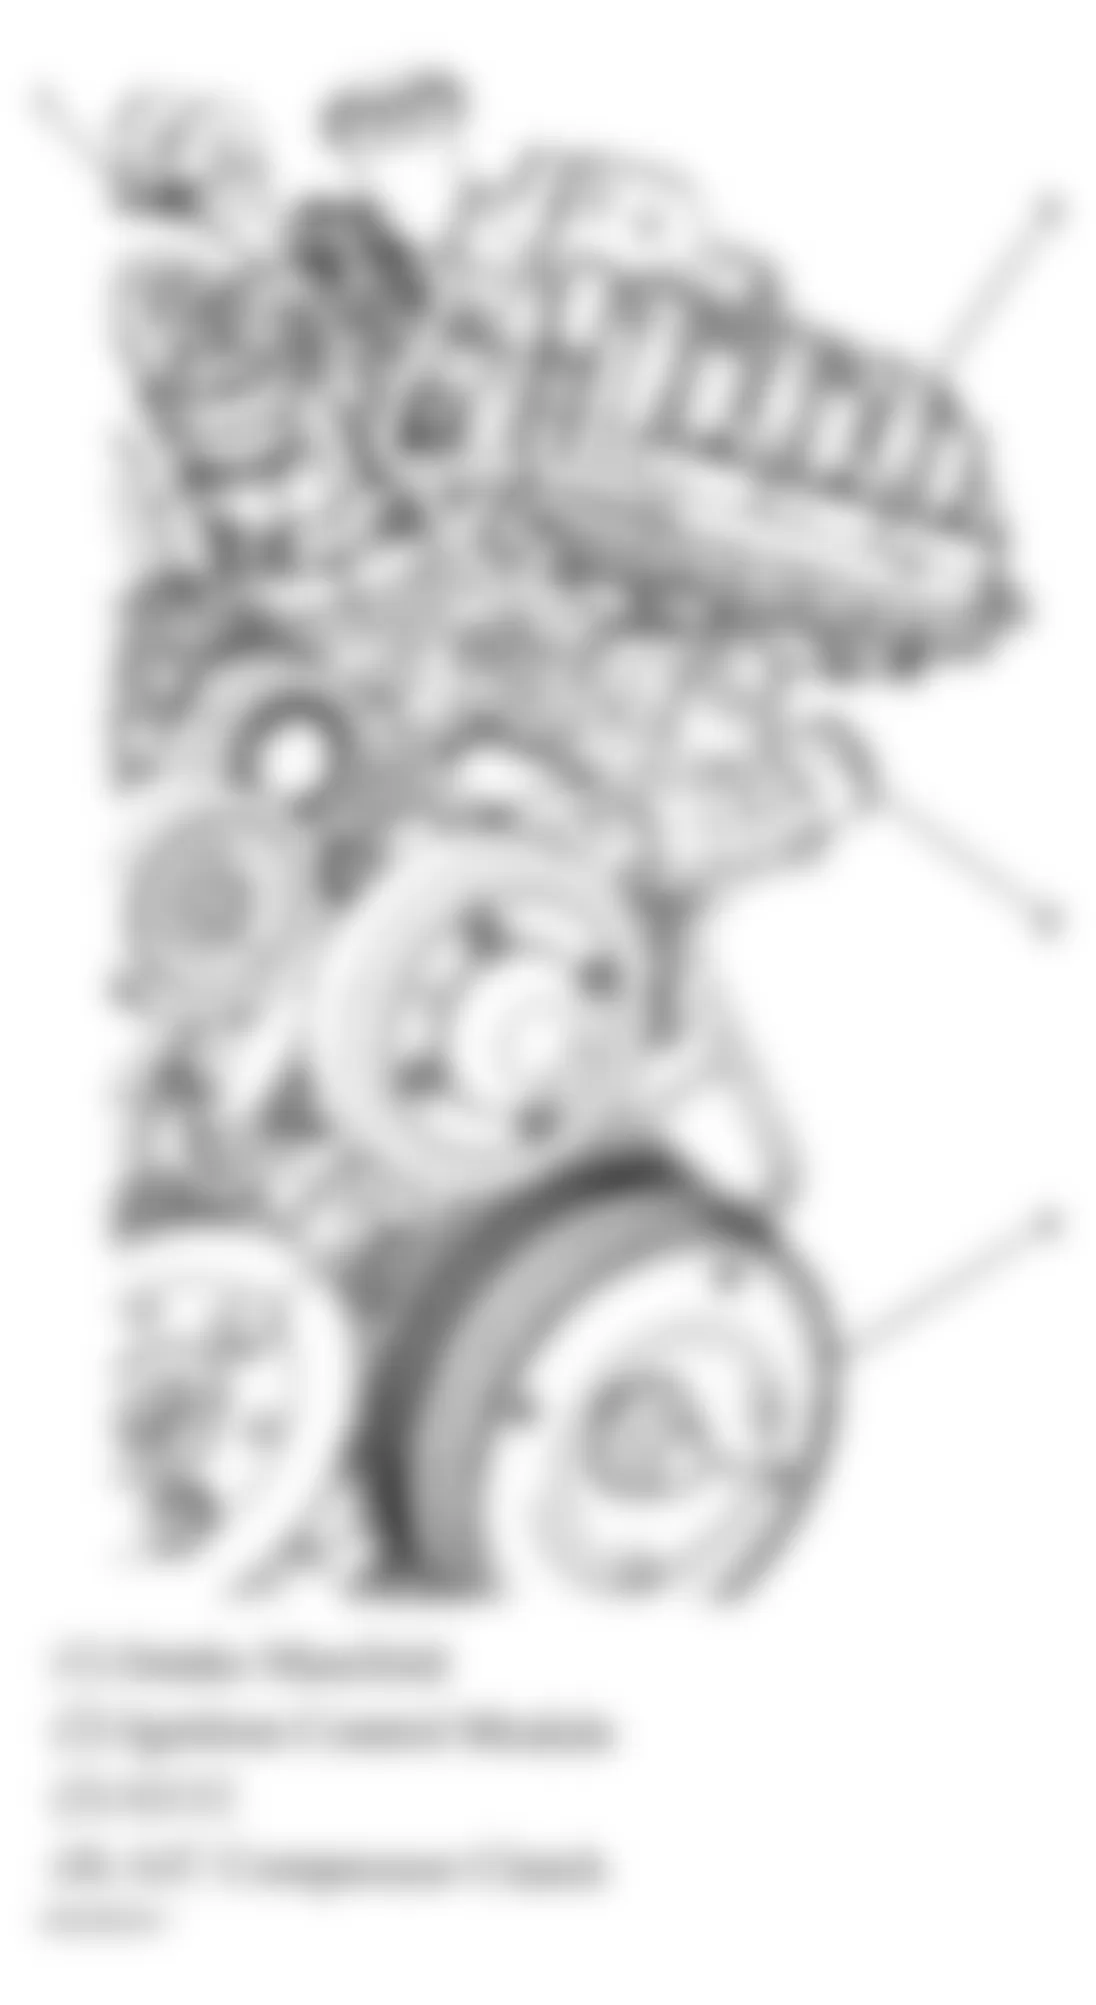 Buick LaCrosse CXS 2006 - Component Locations -  Front Of Engine (3.8L)